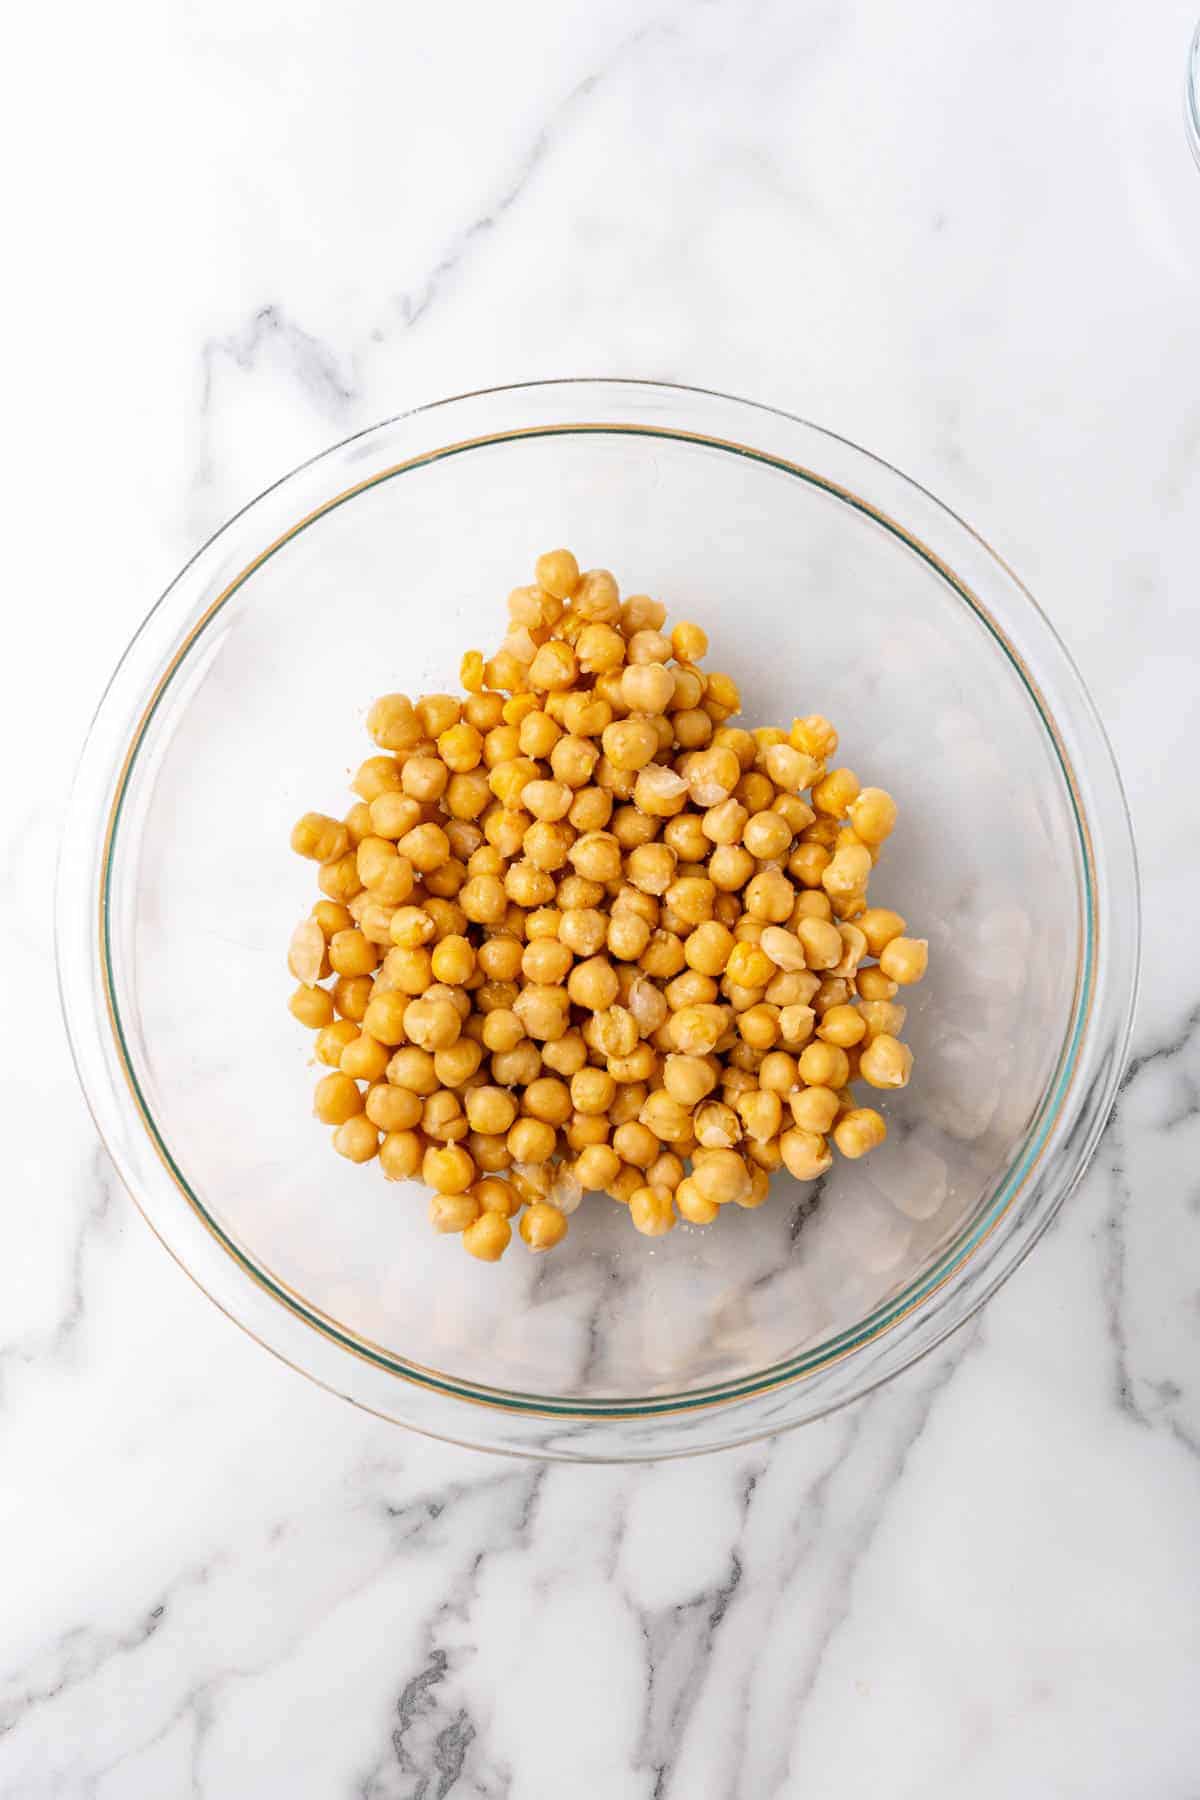 Chickpeas added to a glass bowl, as seen from above on a white marble countertop